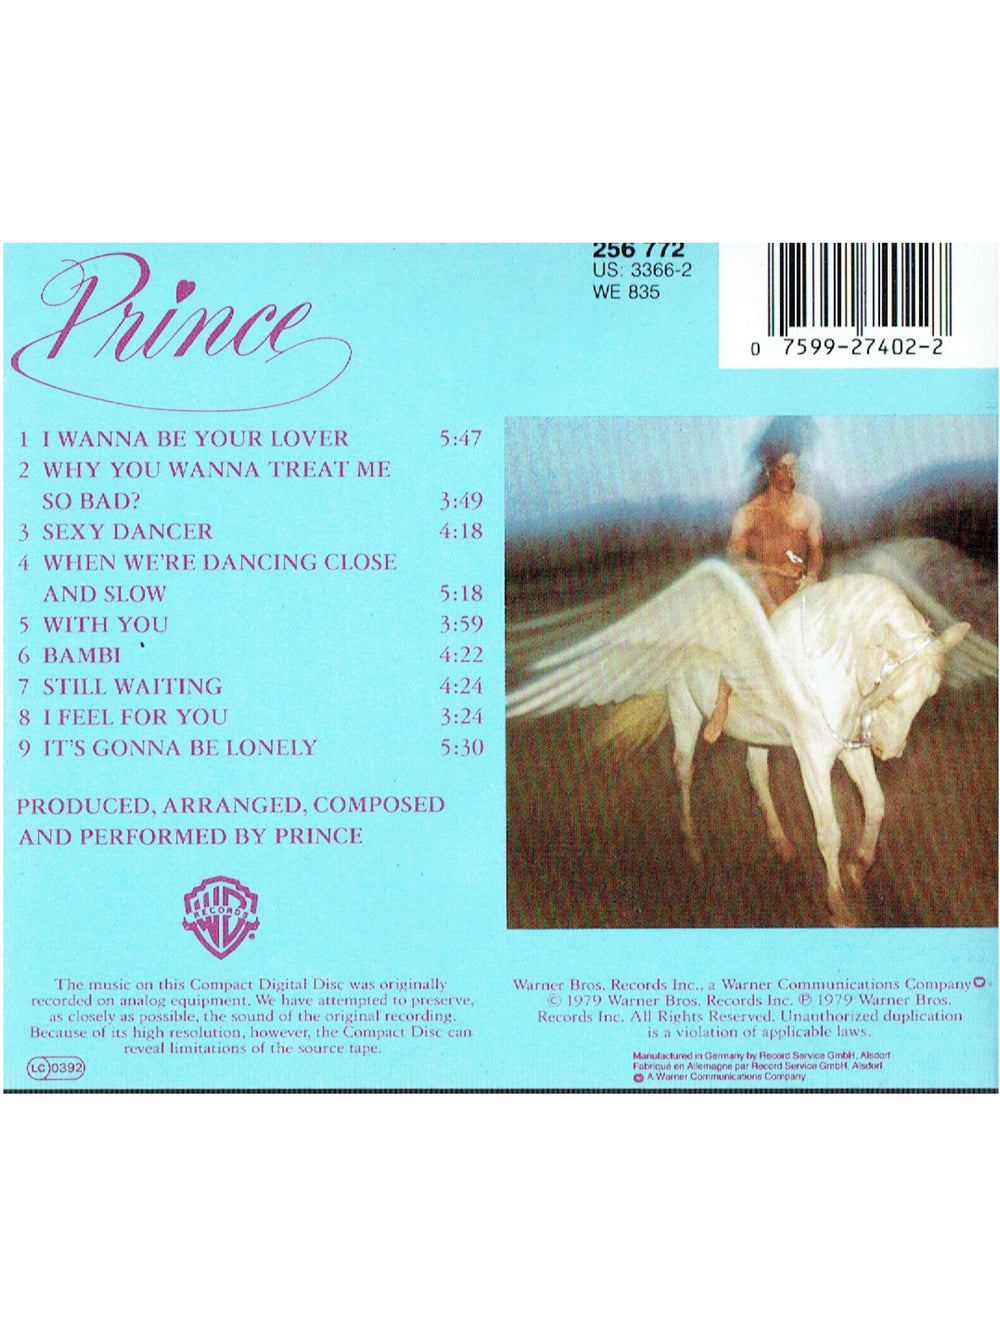 Prince – Prince Self Titled CD Album Reissue Europe Preloved: 1987